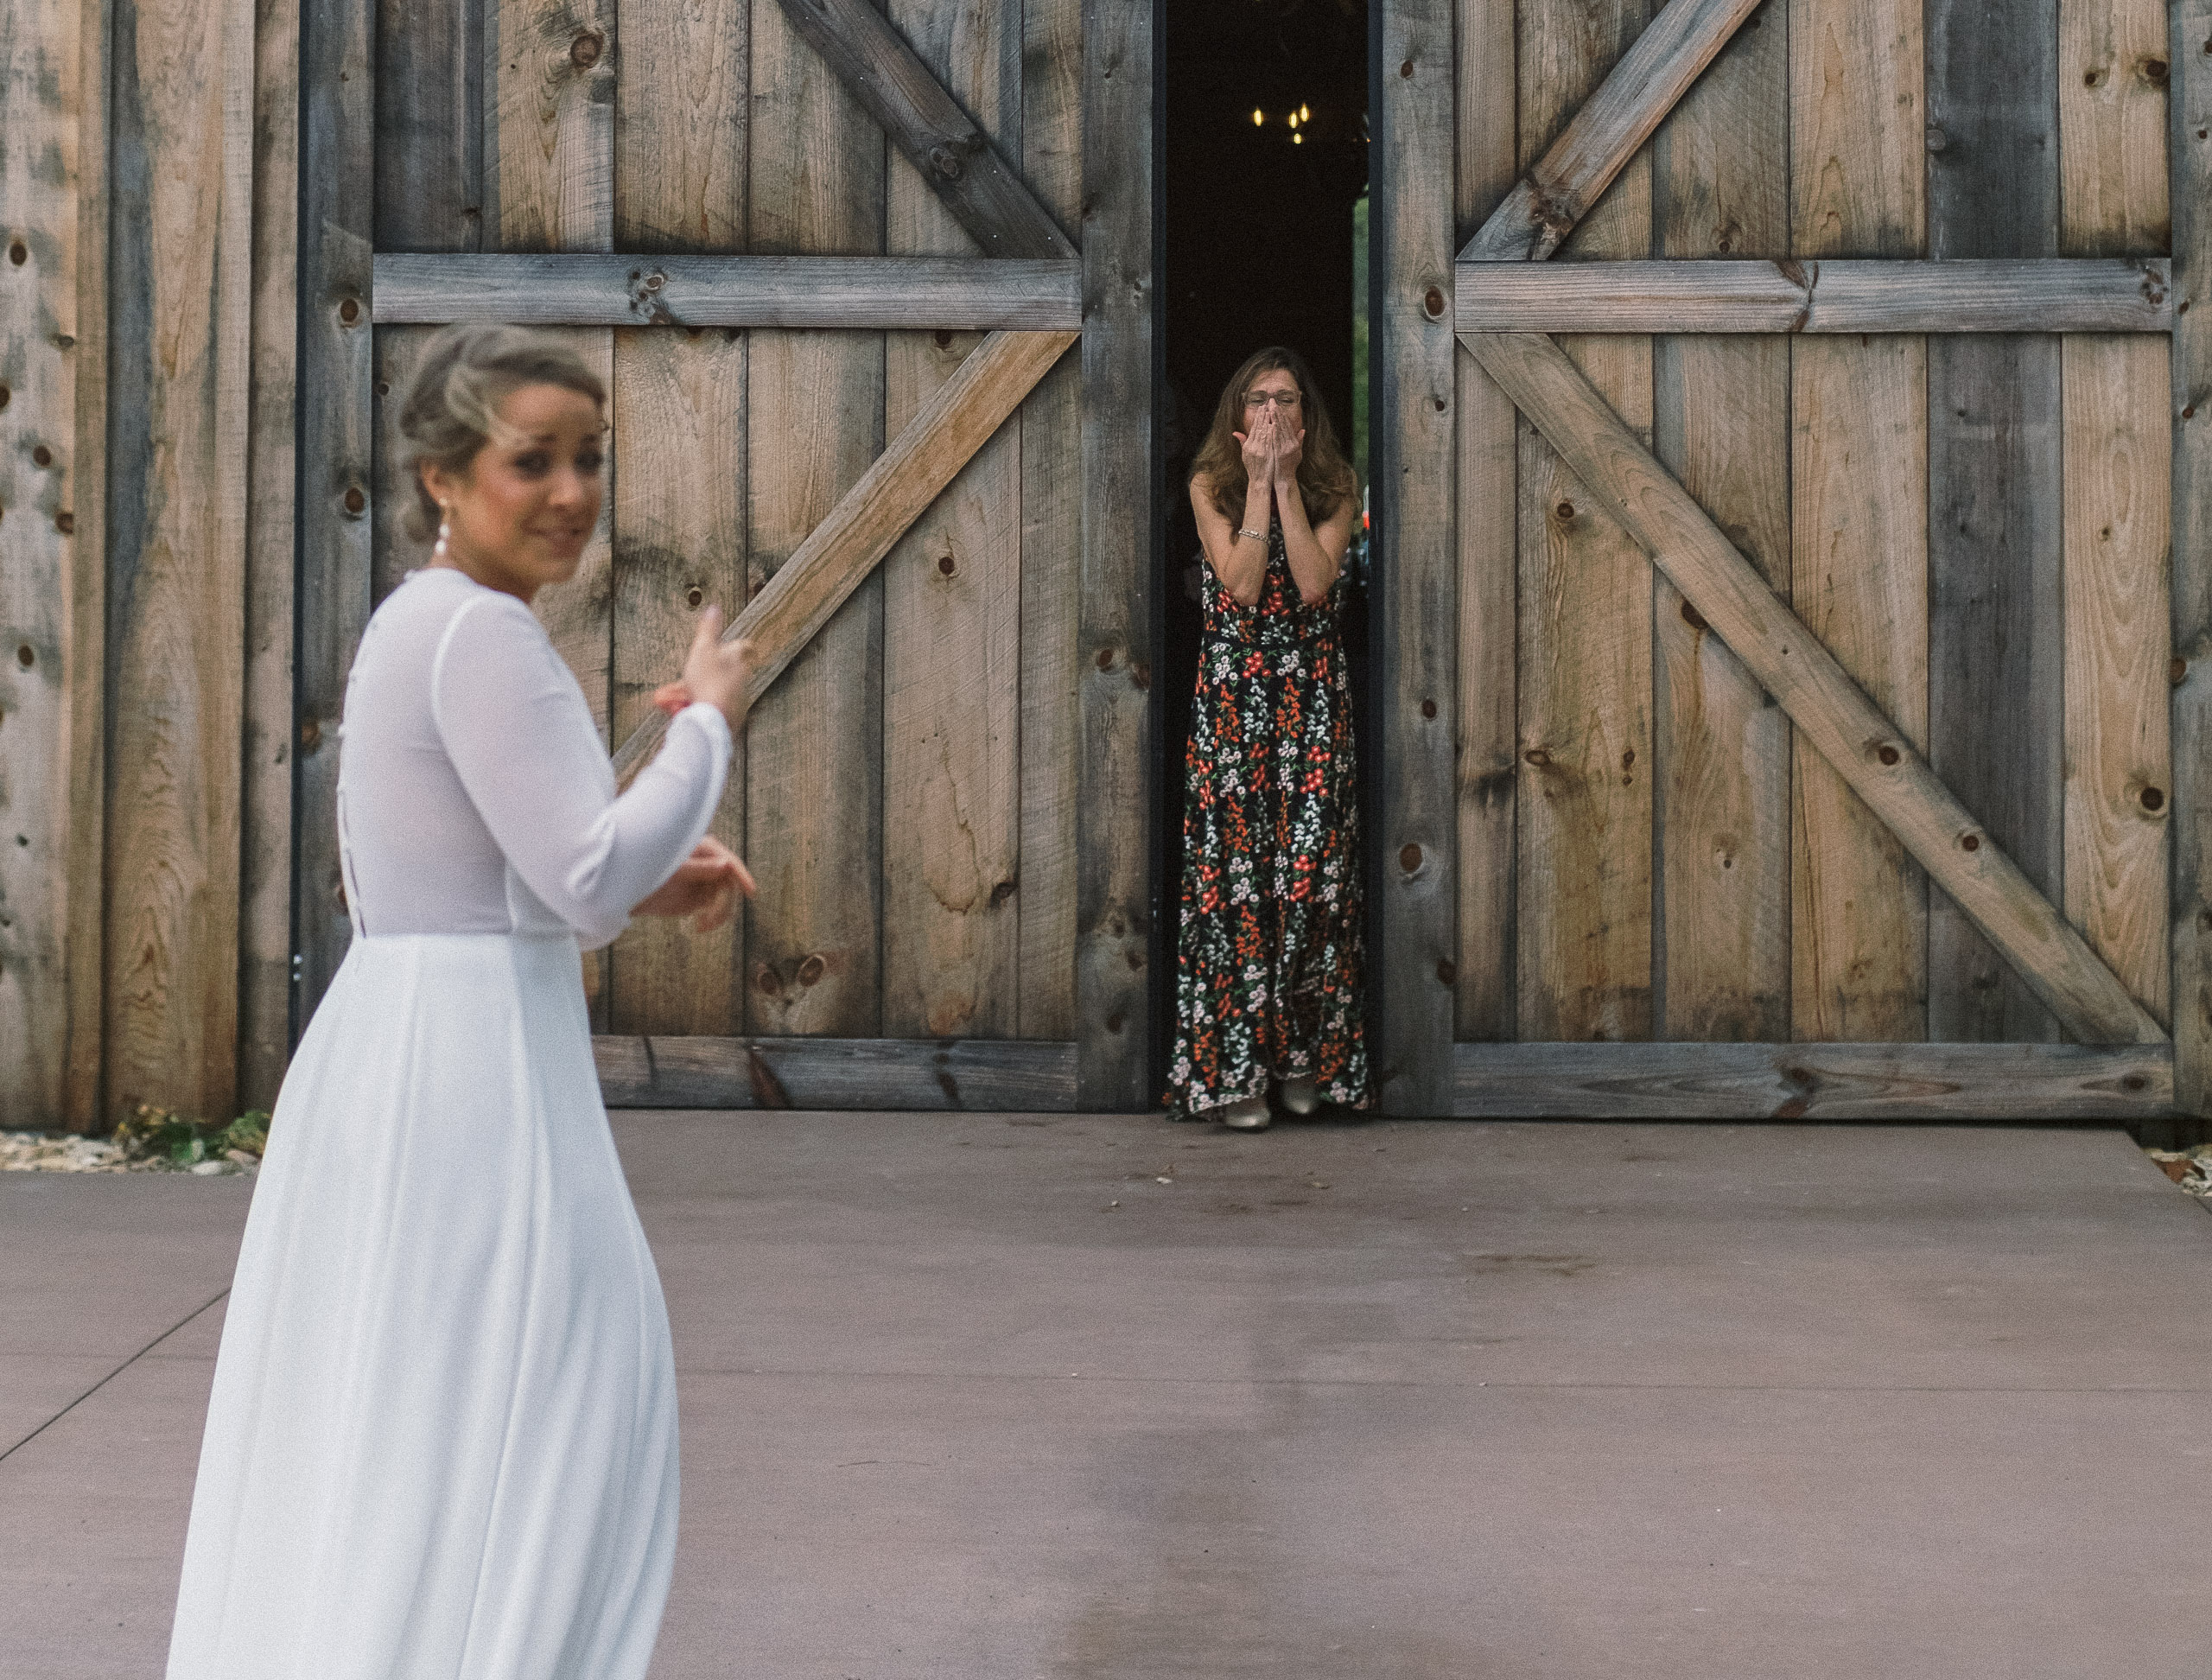 mother sees bride before wedding accidentally - accidental surprise first look - captured by Virginia documentary wedding photographer - fujifilm classic wedding photo